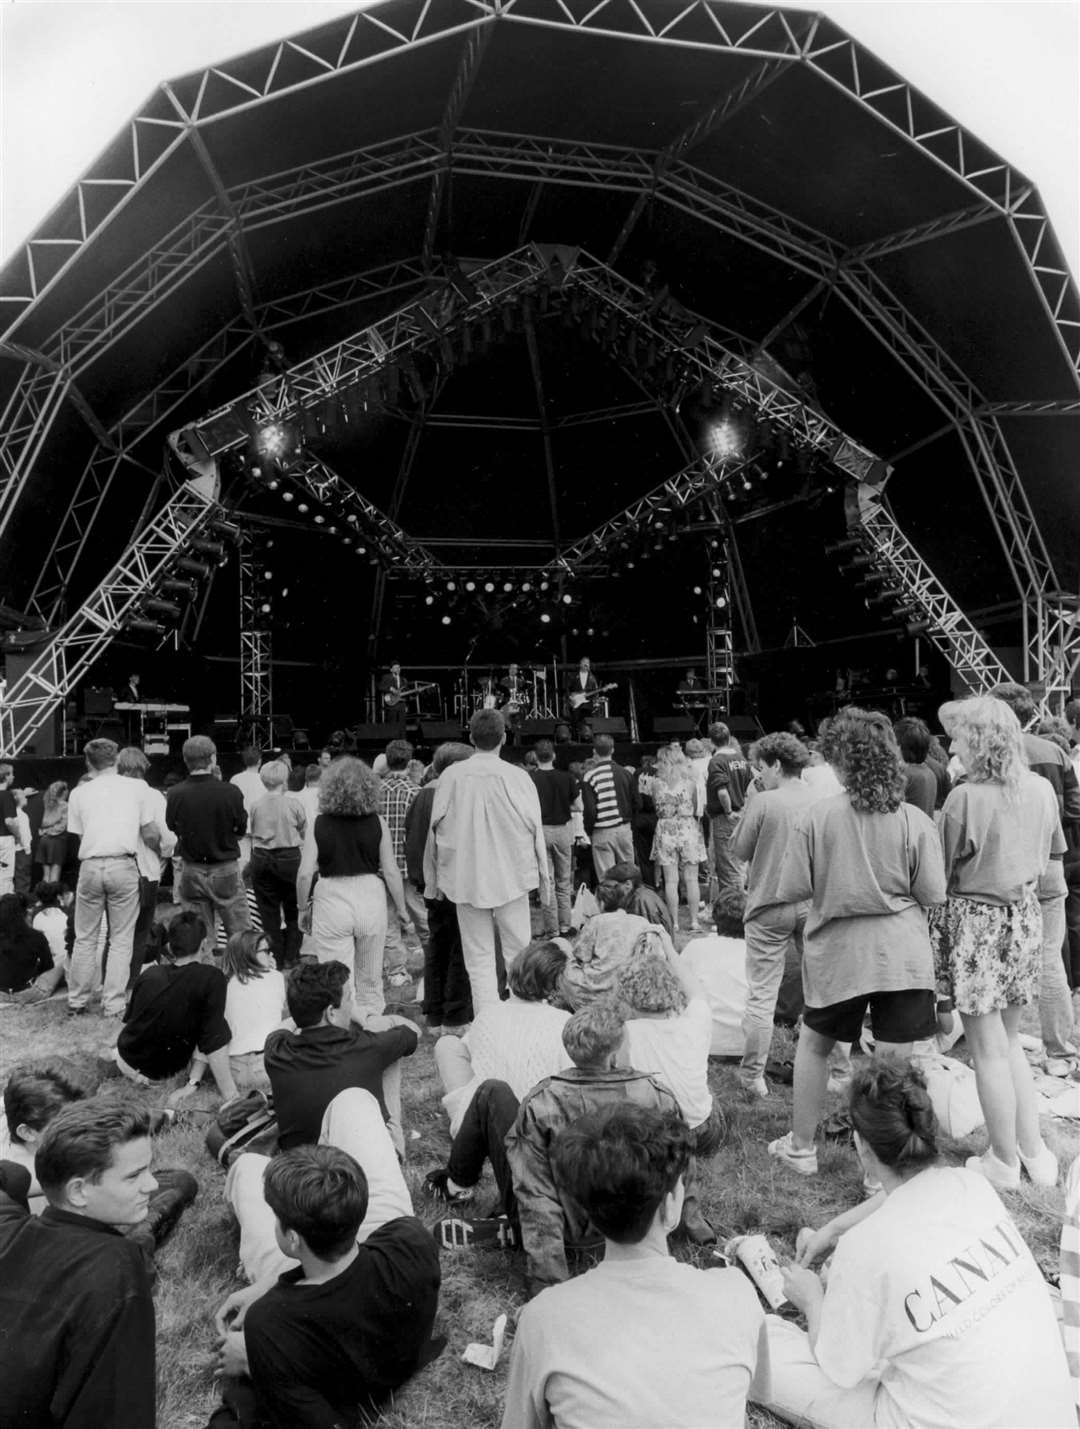 Crowds in front of the stage at Broome Park